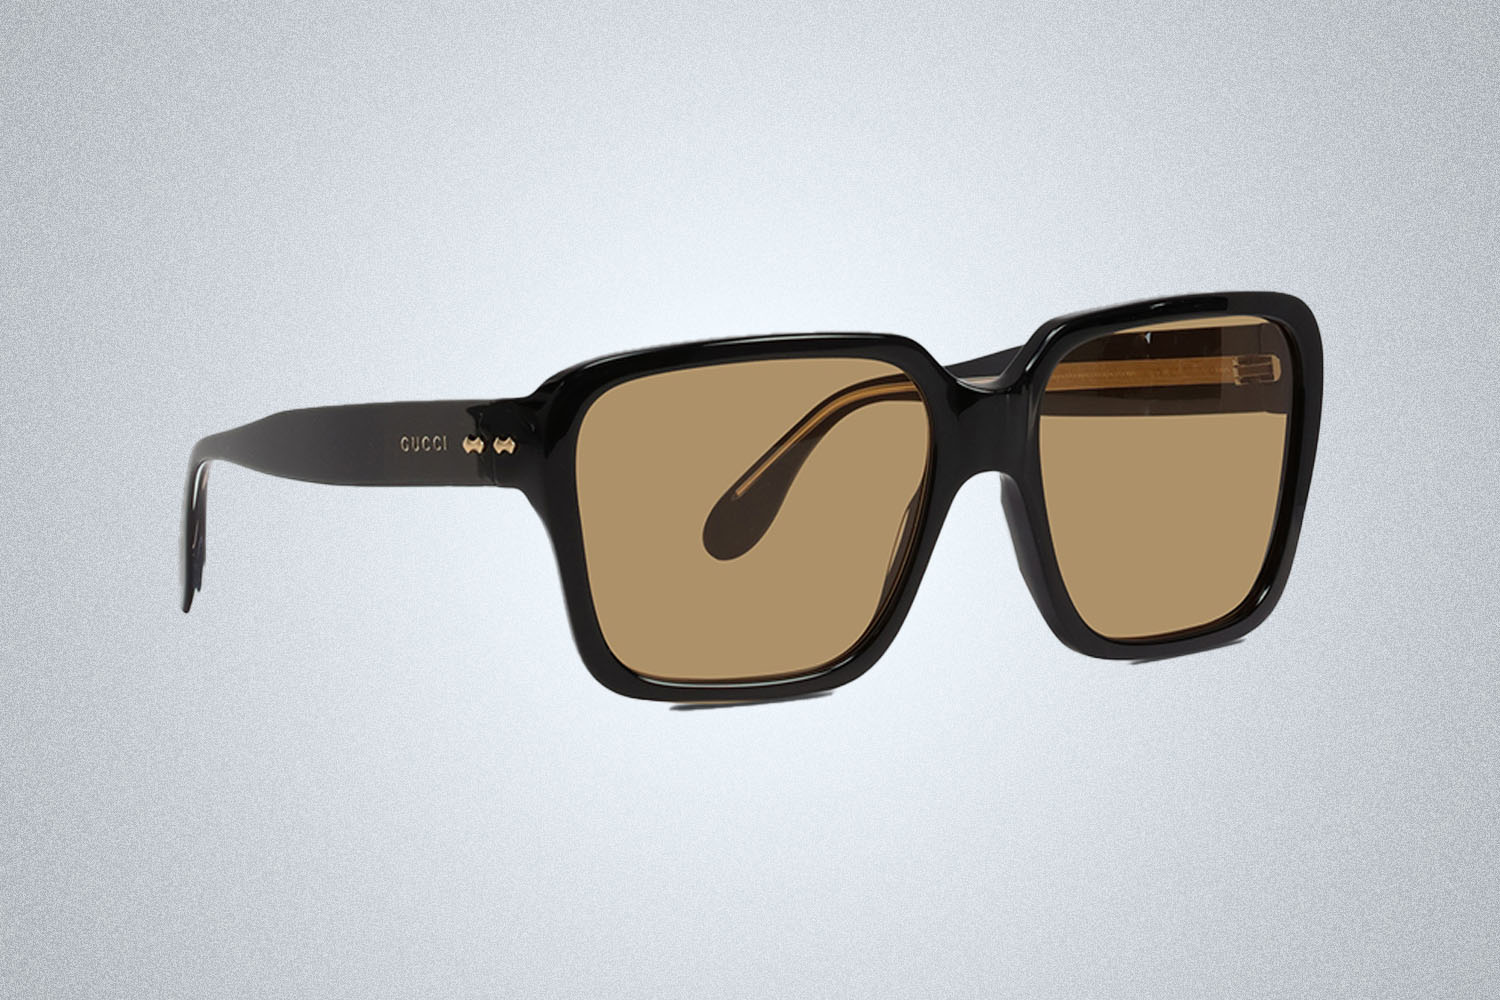 a pair of designer sunglasses from Gucci on a grey background